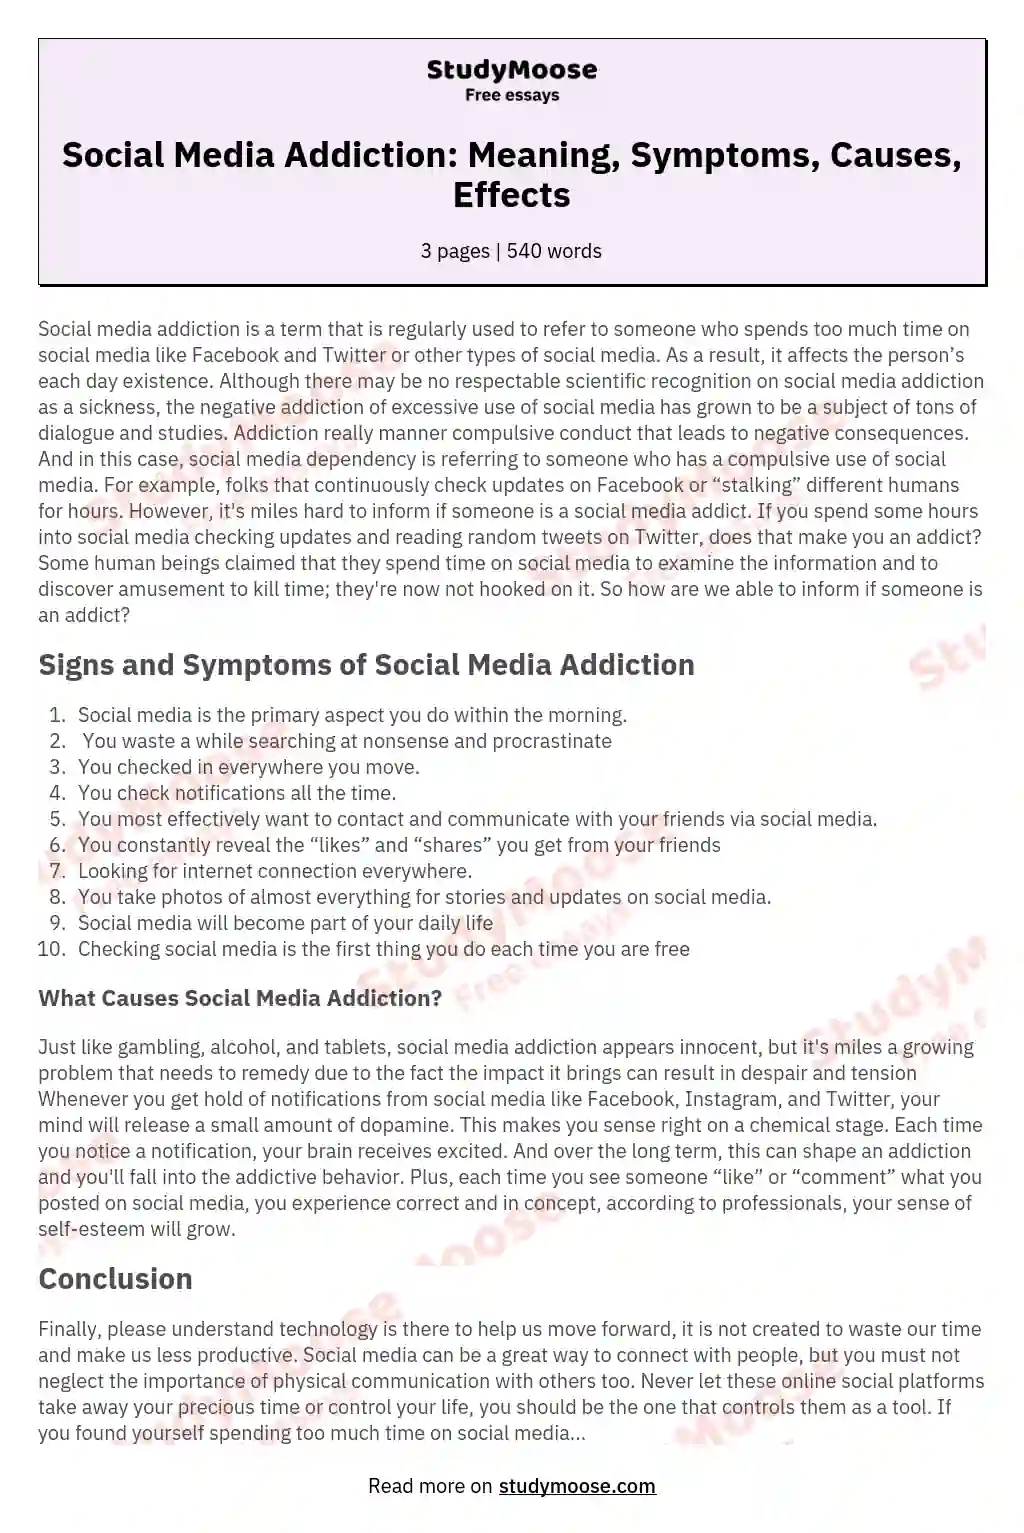 Social Media Addiction: Meaning, Symptoms, Causes, Effects essay